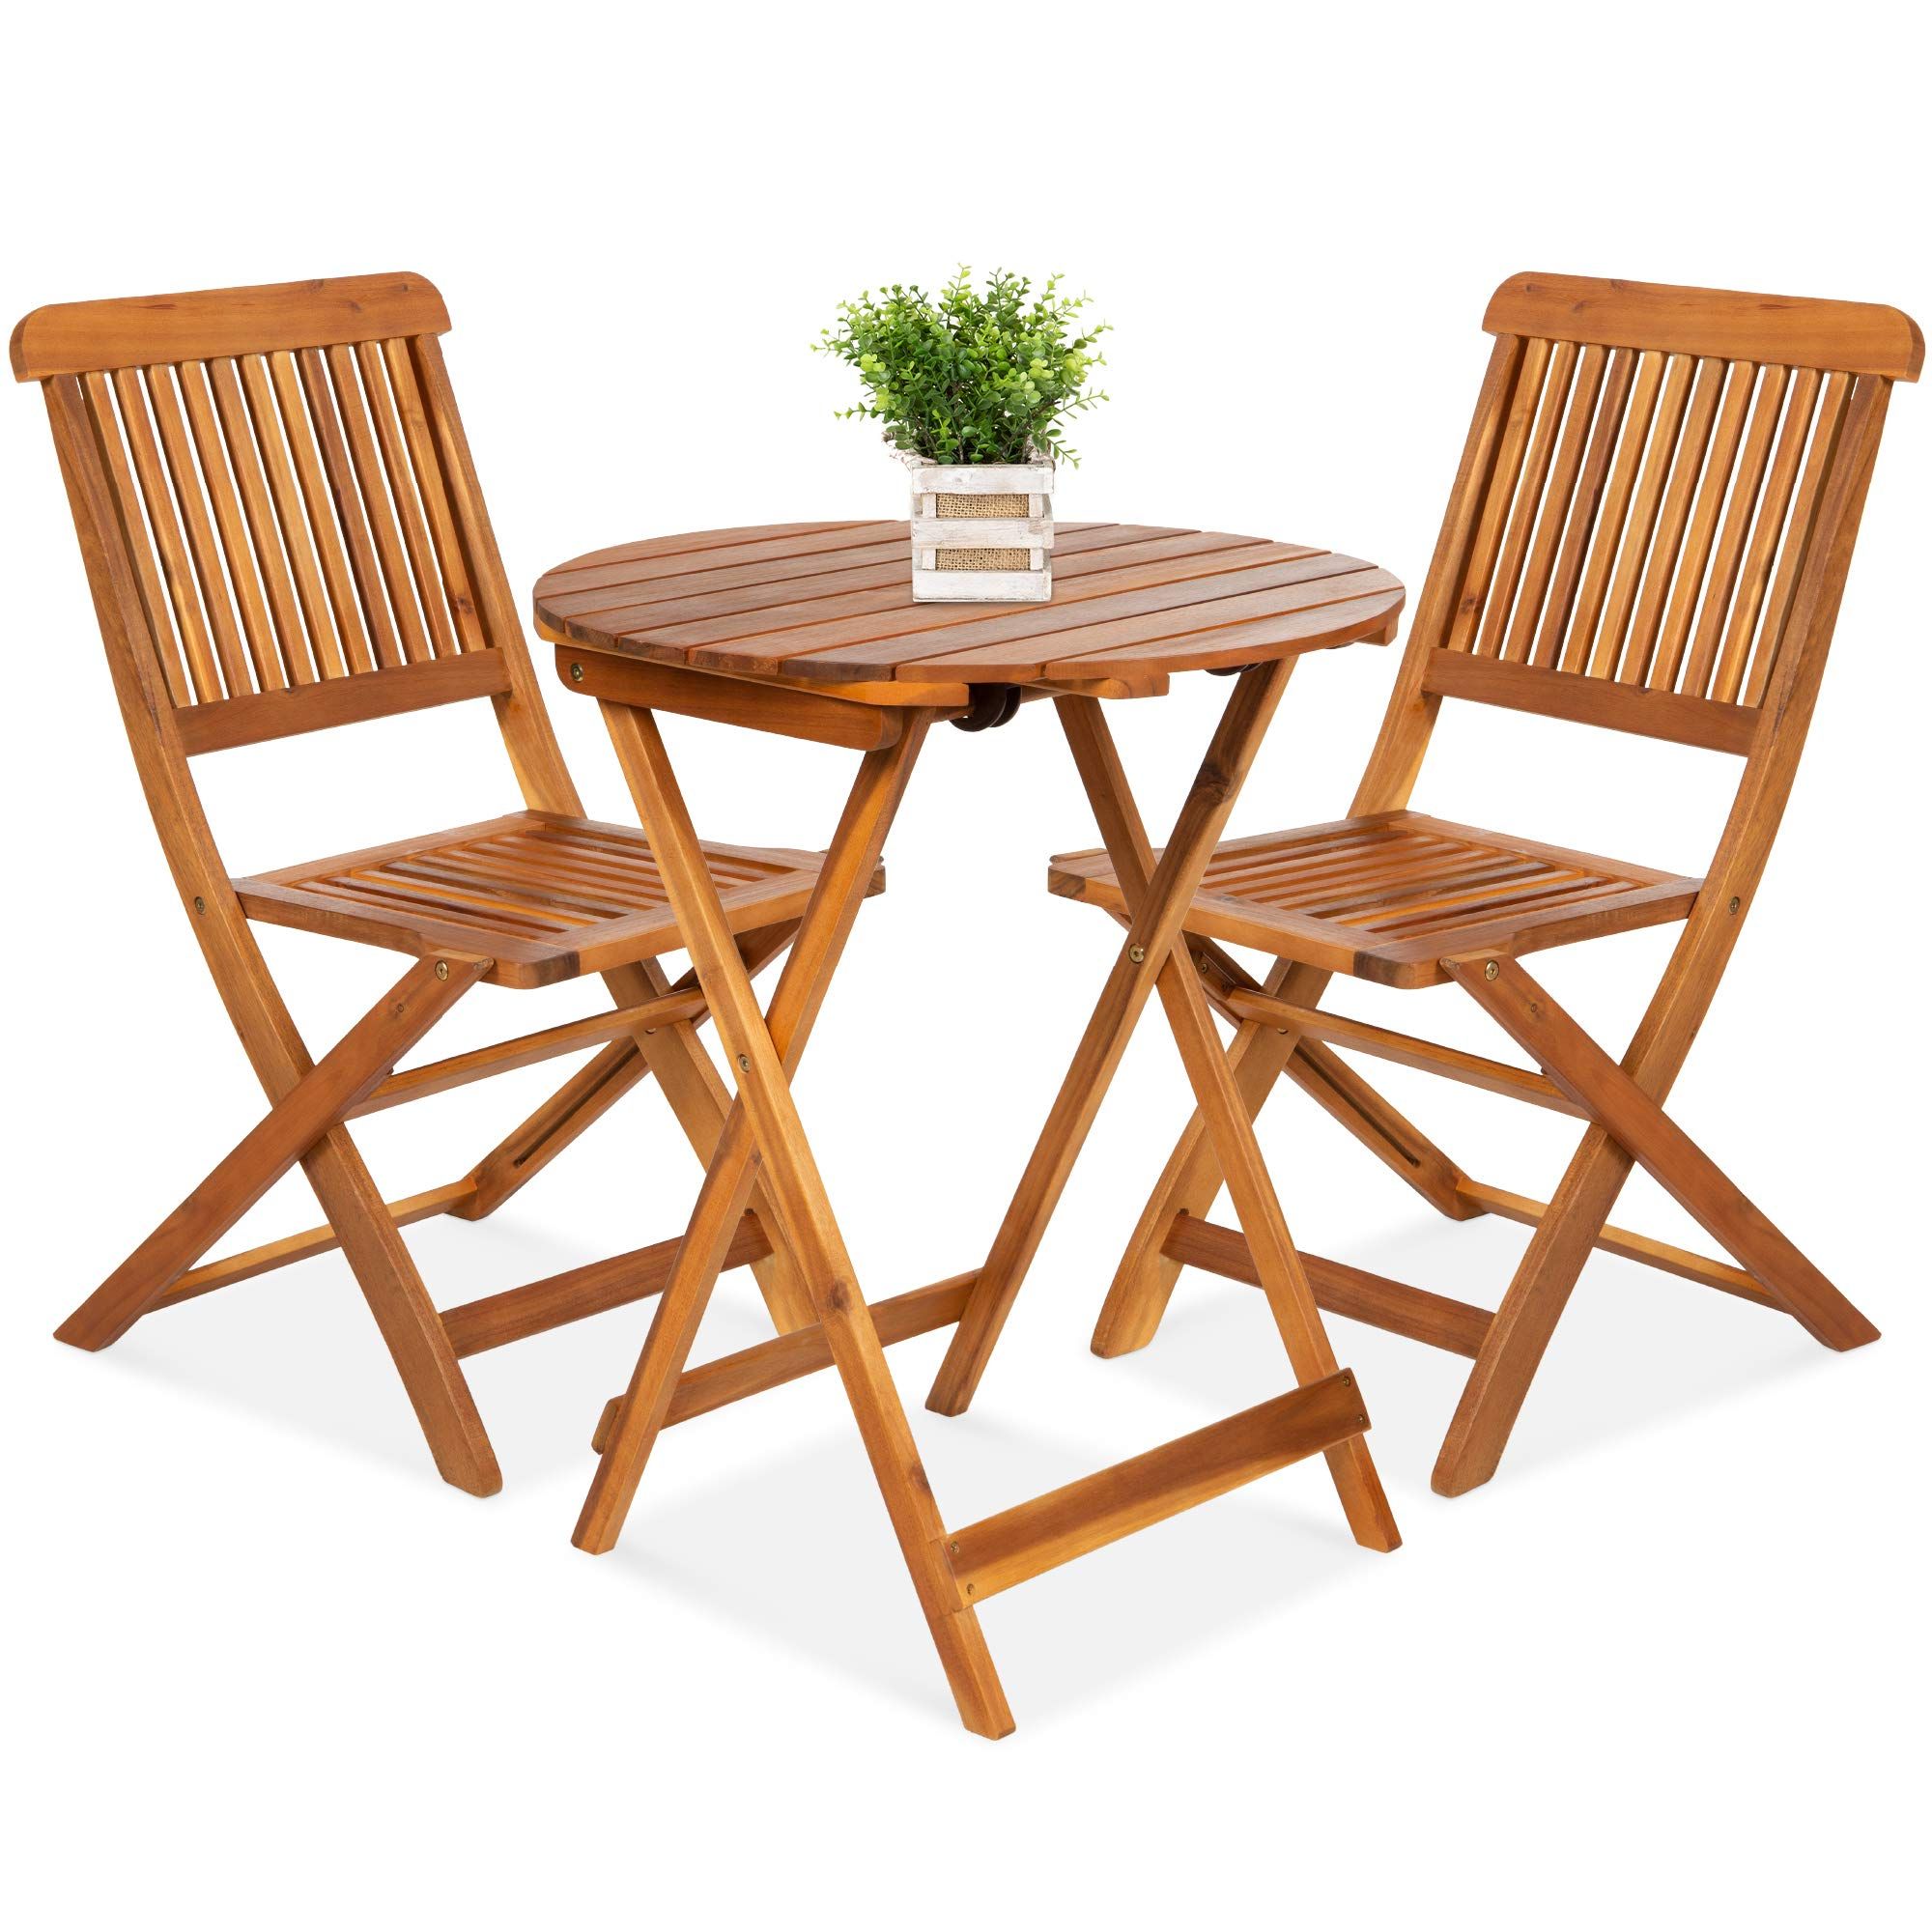 Preferred Amazon: Best Choice Products 3 Piece Acacia Wood Bistro Set, Folding  Patio Furniture For Backyard, Balcony, Deck W/ 2 Chairs, Round Coffee Table,  Teak Finish – Natural : Patio, Lawn & Garden With Acacia Wood With Table Garden Wooden Furniture (View 9 of 15)